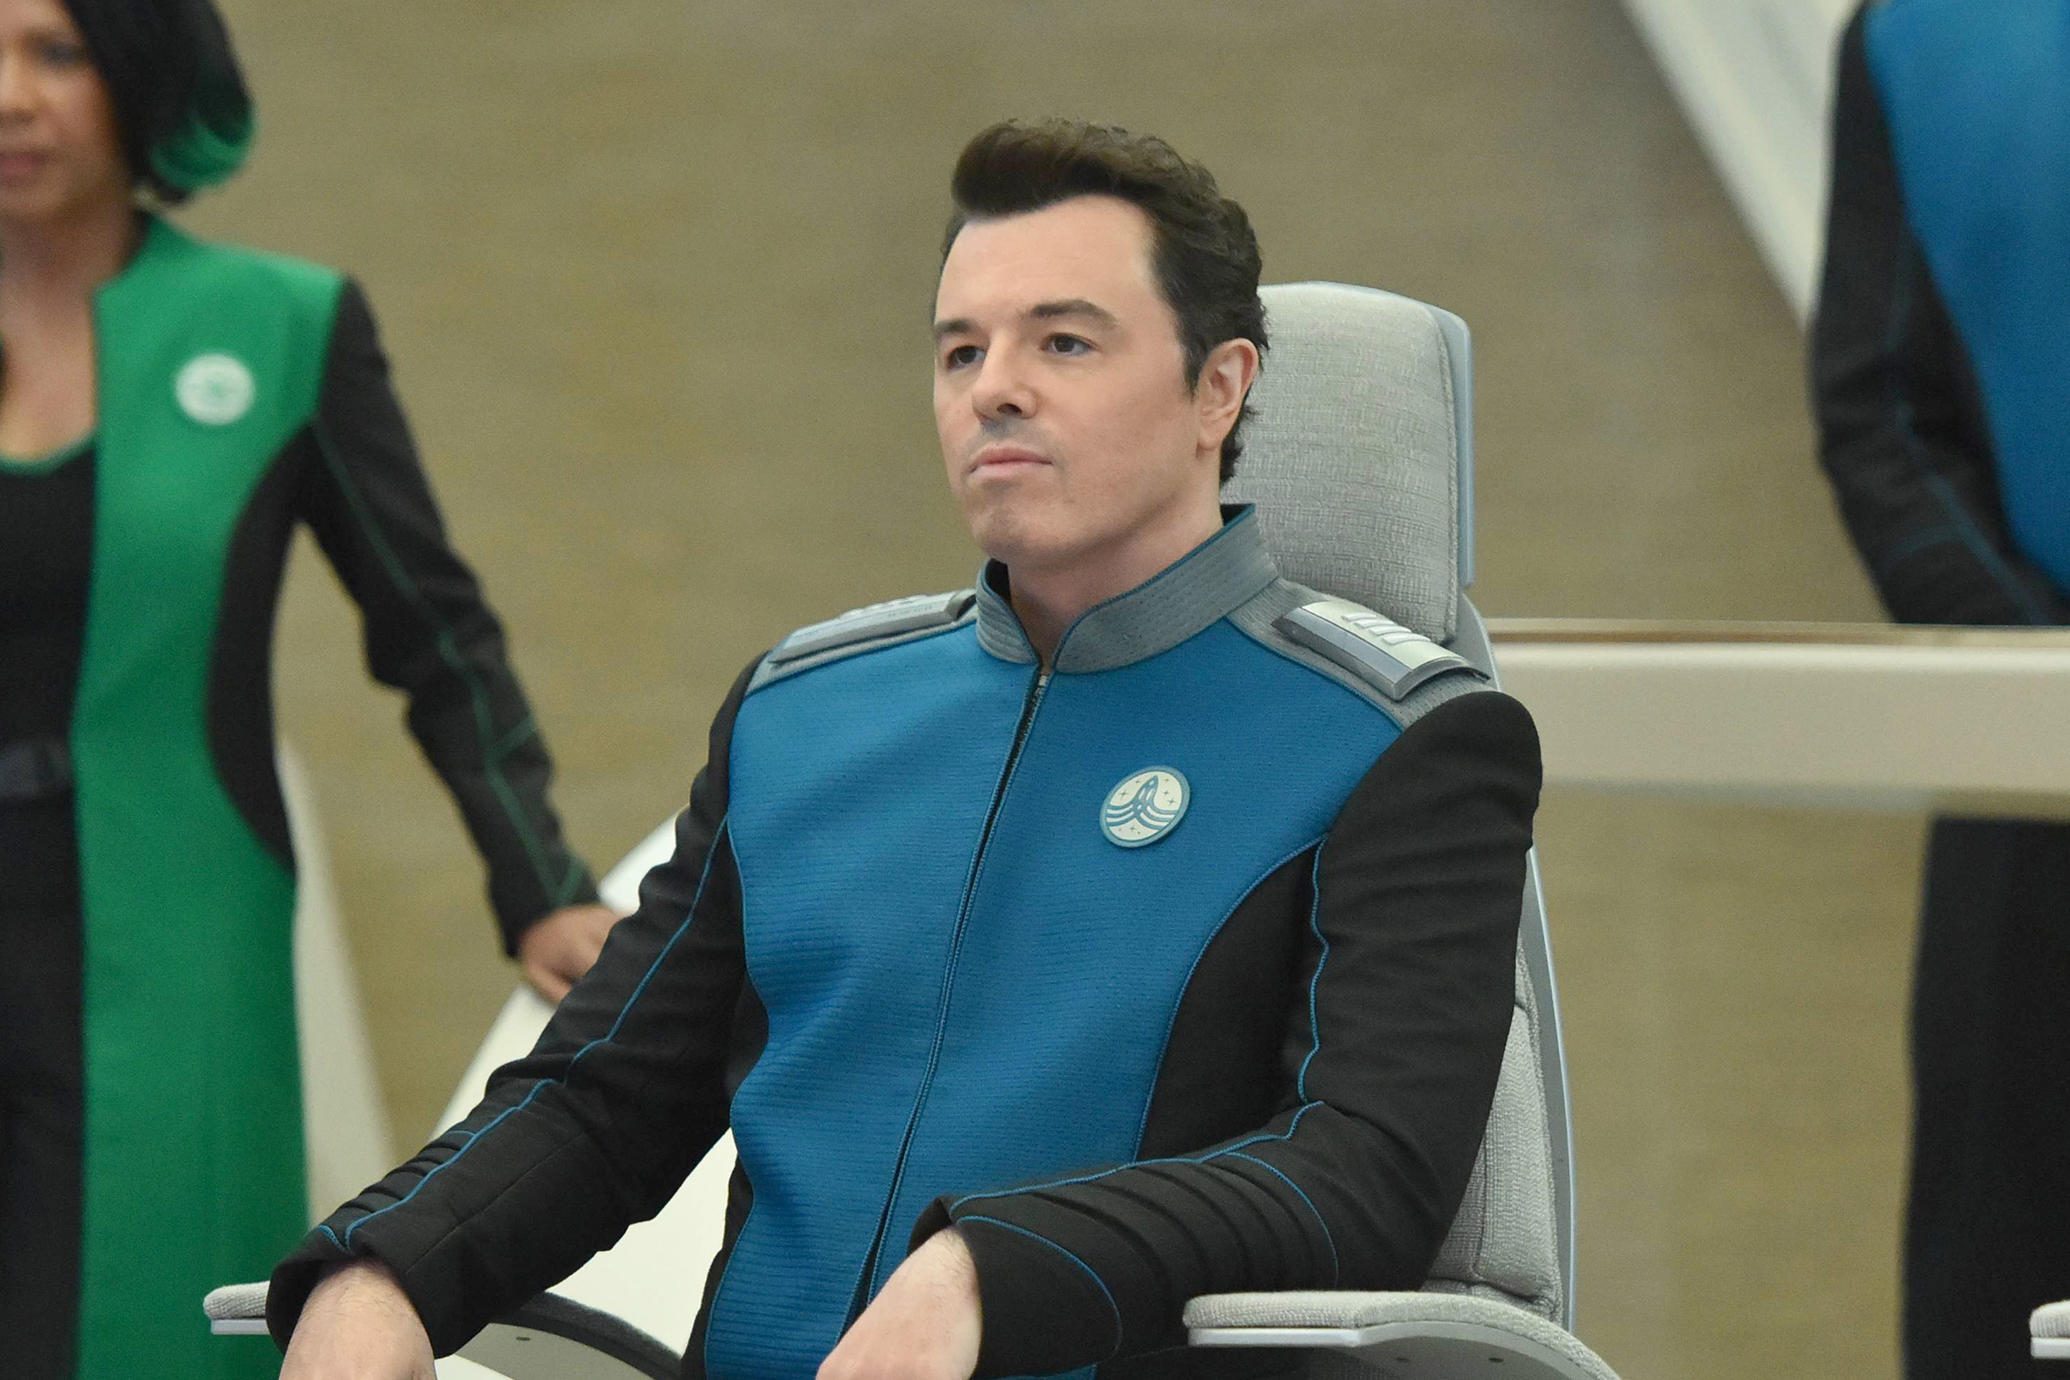 Seth MacFarlane States There Will Be More To Come For His Series 'The Orville'